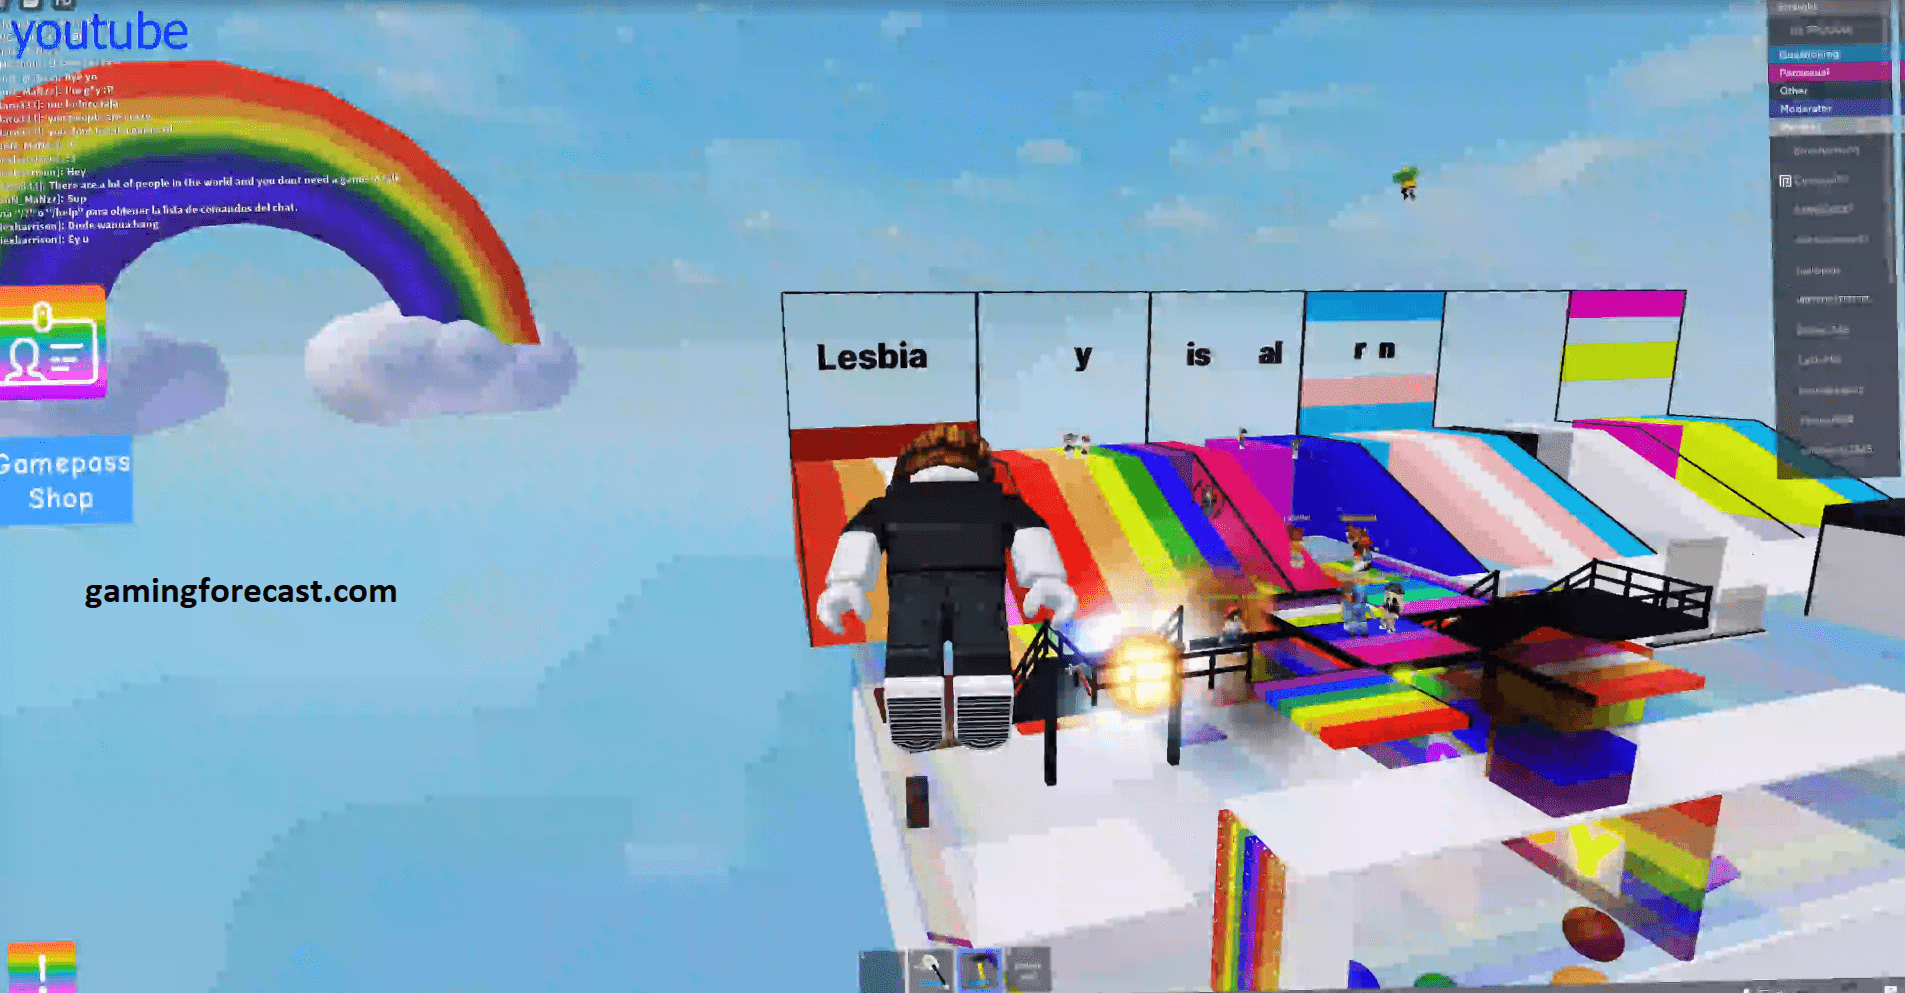 Roblox Hack Download Pc Destroy Lobby Fly Aimbot Scripts 2021 Gaming Forecast Download Free Online Game Hacks - hacker para counter roblox download